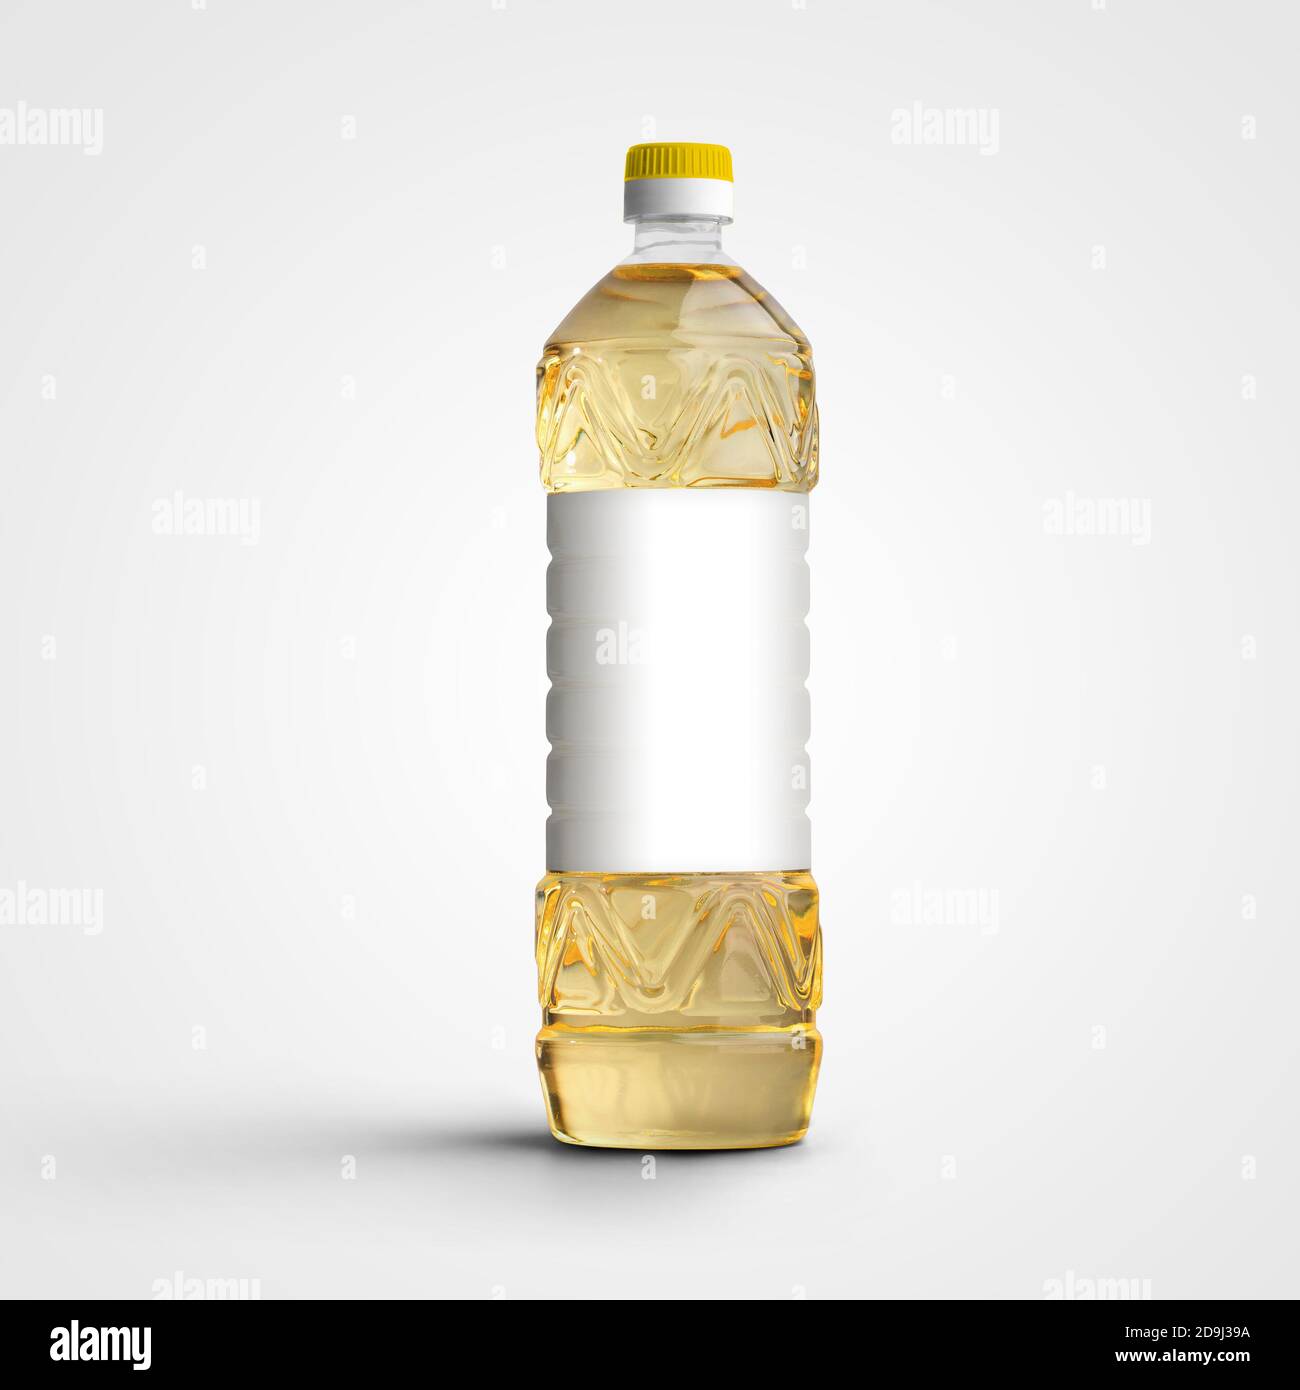 Download Mockup Plastic Bottle With Vegetable Olive Oil Isolated On White Background Transparent Packaging Template With Sunflower Liquid Container 1000ml Stock Photo Alamy